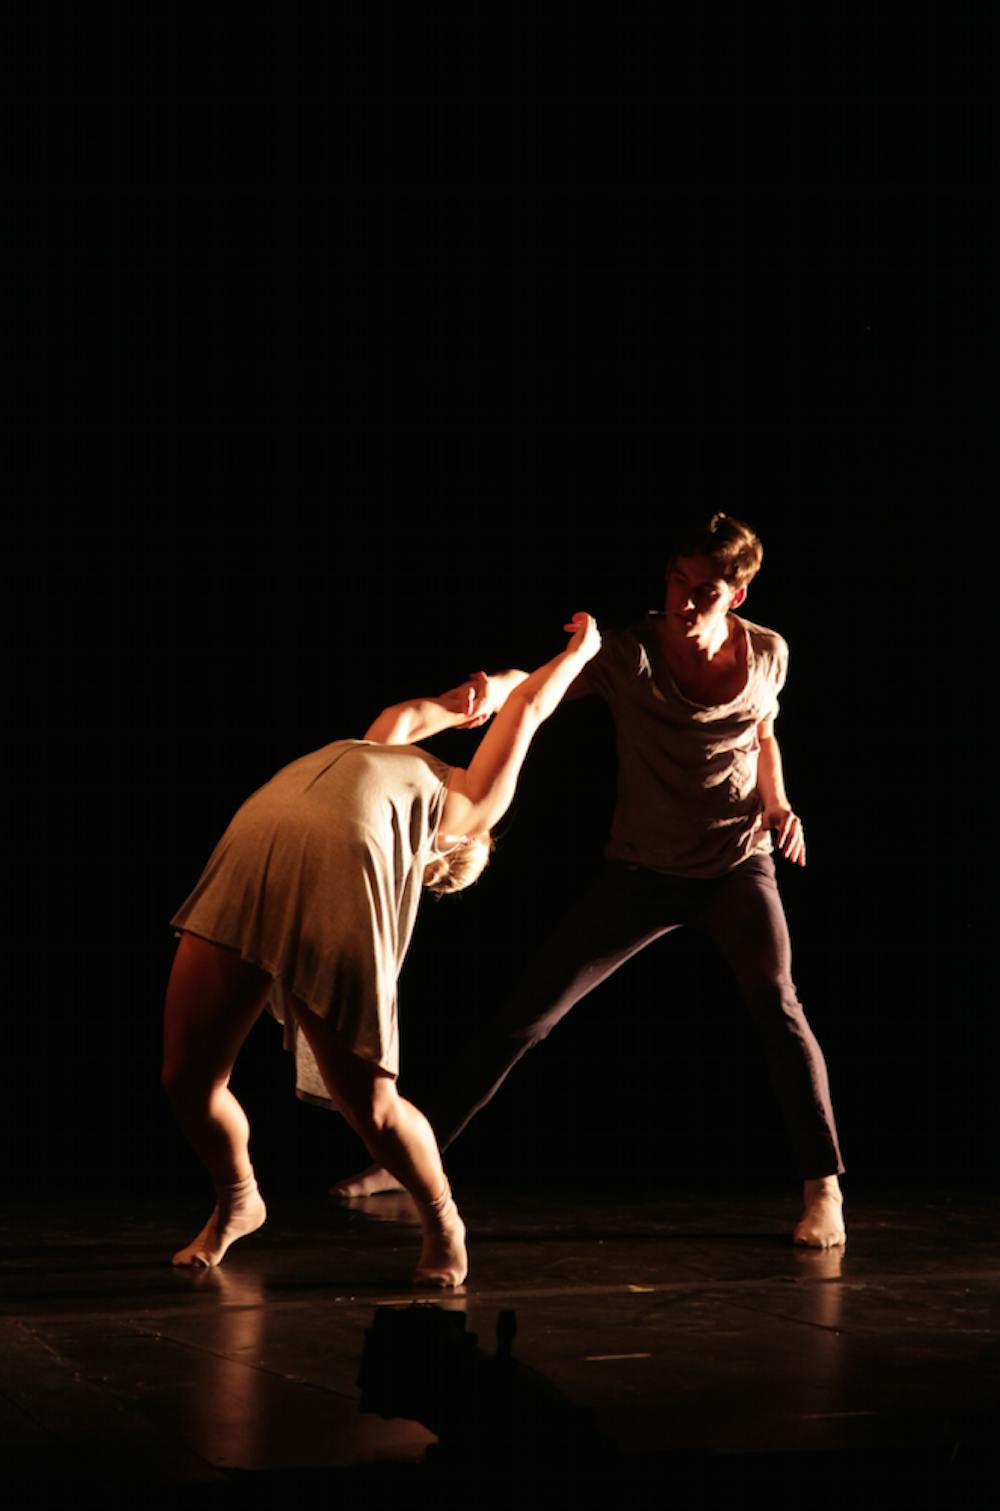 <p>Senior dance majors&nbsp;Mollie Craun and Tyler Ring perform Susan Koper's work "A Duet". Best of Ball State Dance Theatre: Past and Present will be on Dec. 10-12 at 7:30 p.m. and Dec. 13 at 2:30 p.m. at the University Theatre.&nbsp;<em>PHOTO PROVIDED BY AUDRA SOKOL</em></p>